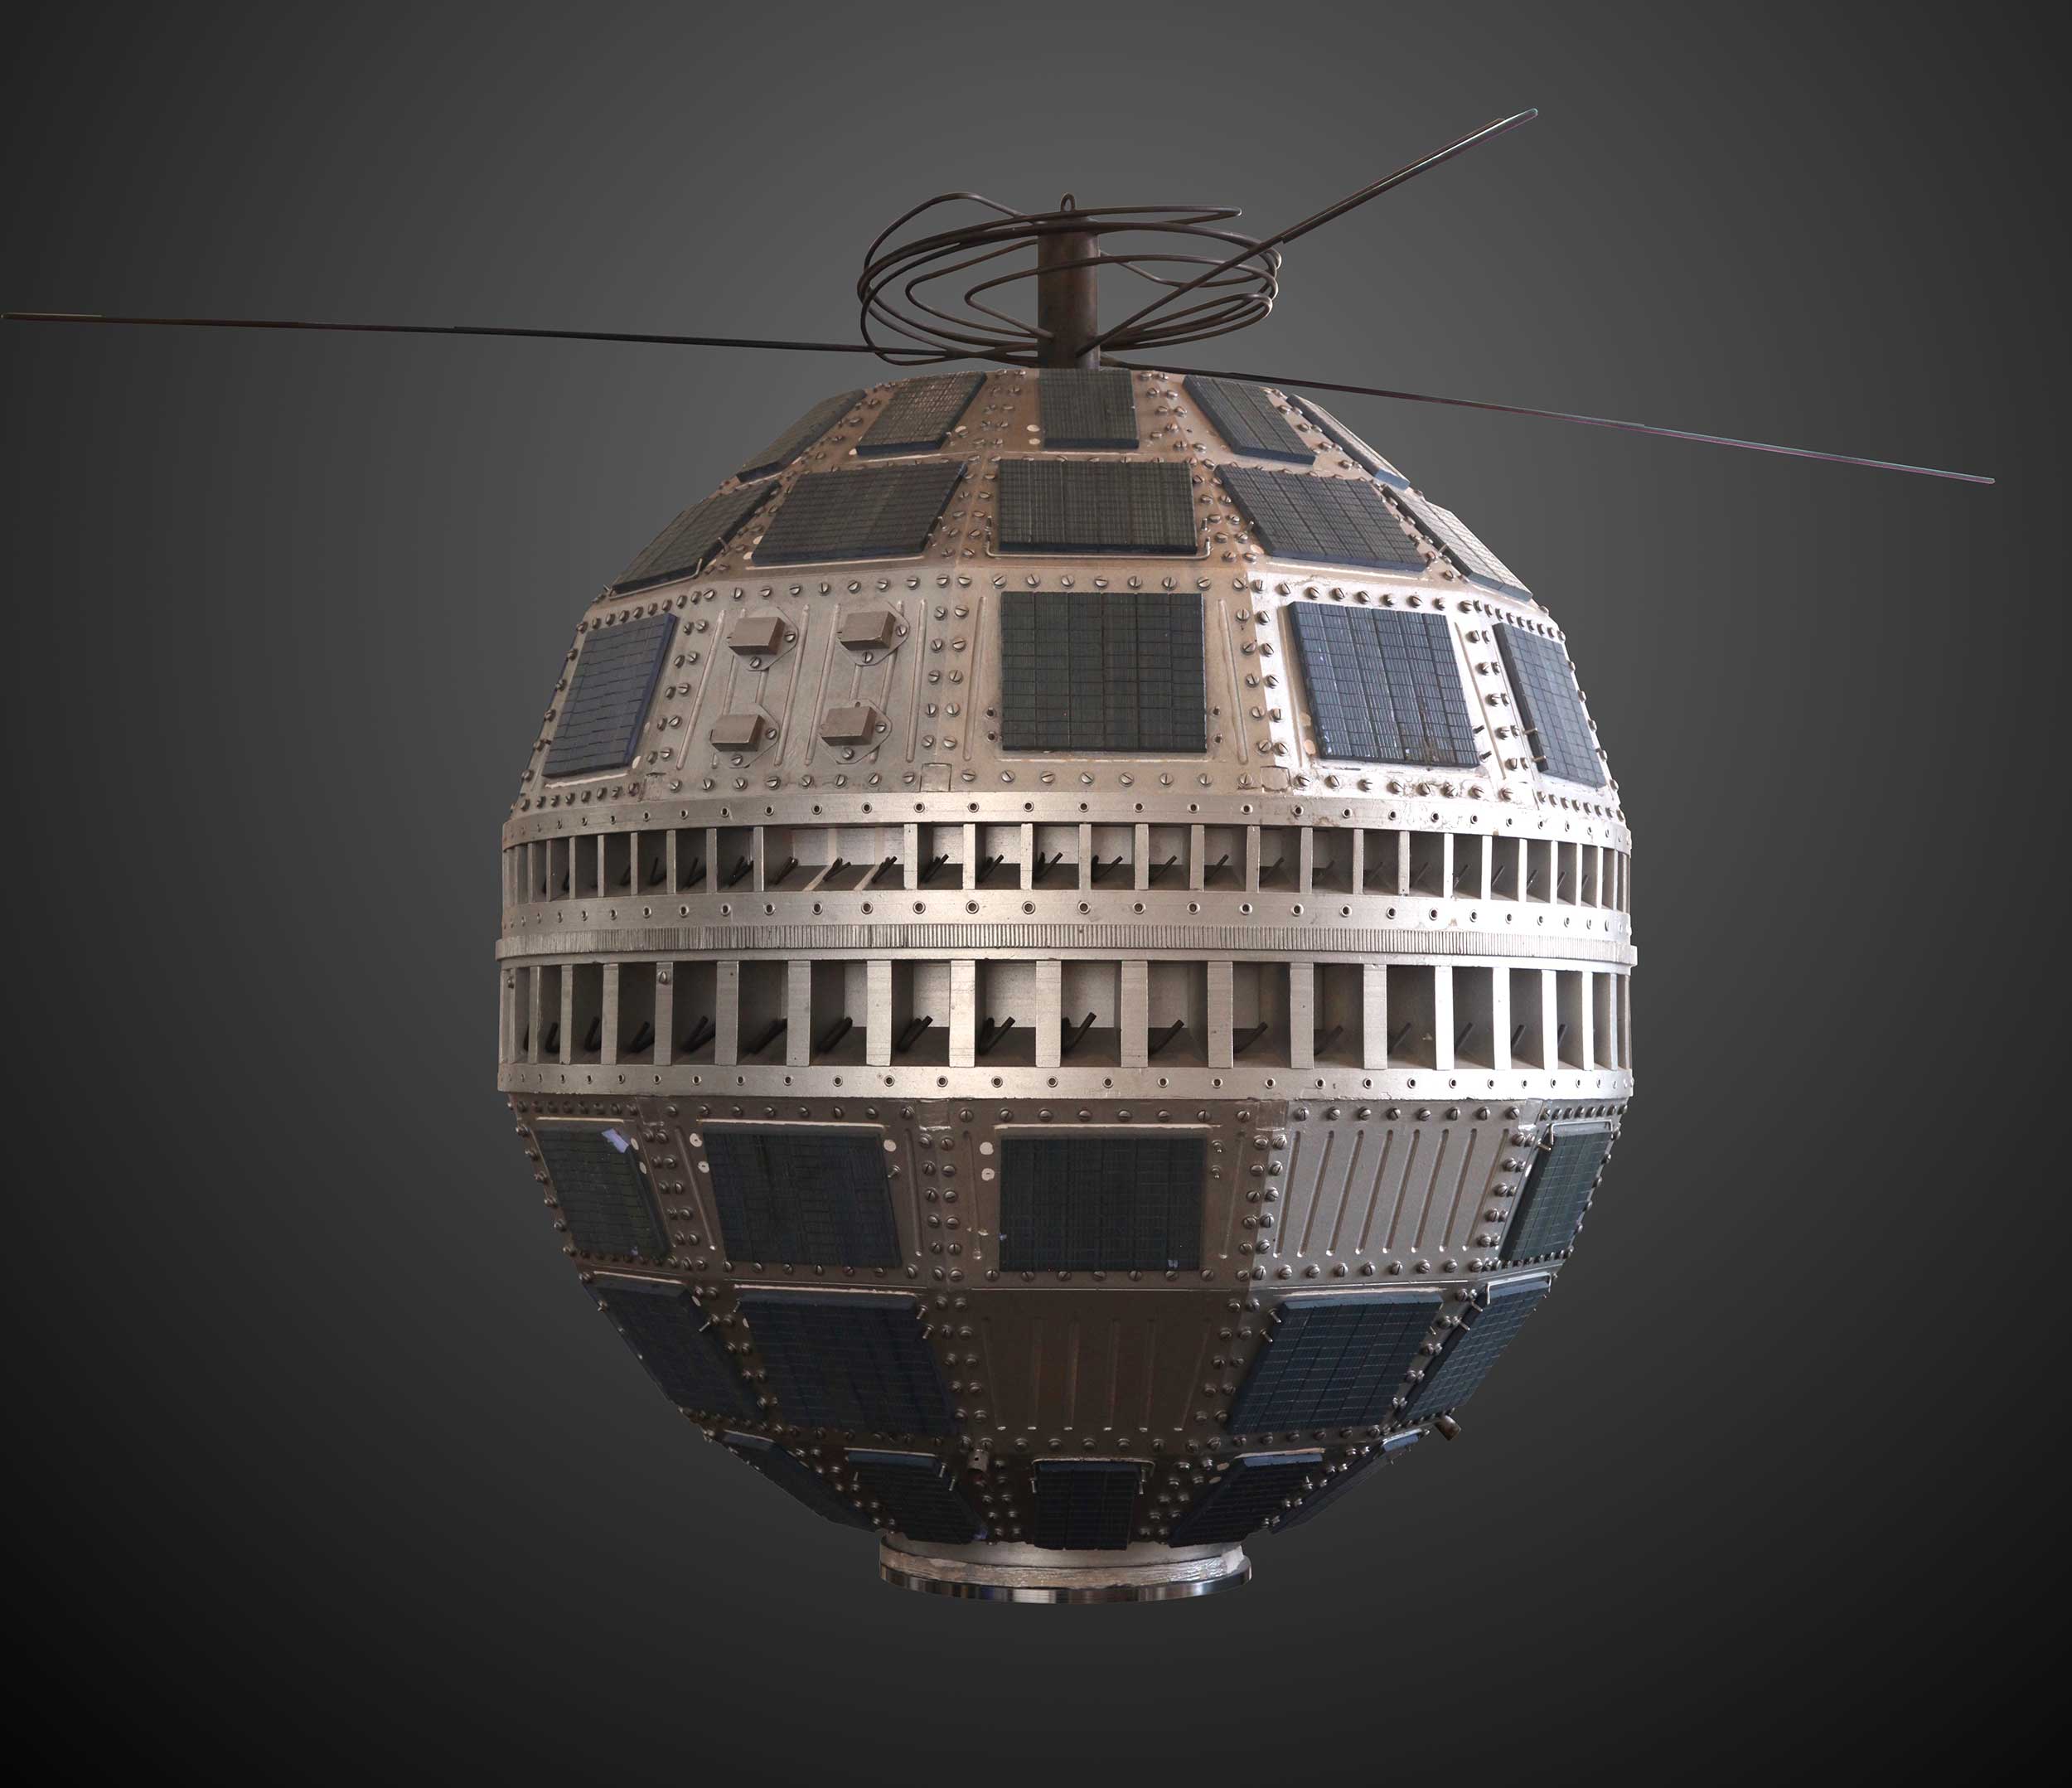 An angular globe-like satellite with panels and wires, floating on a dark grey background